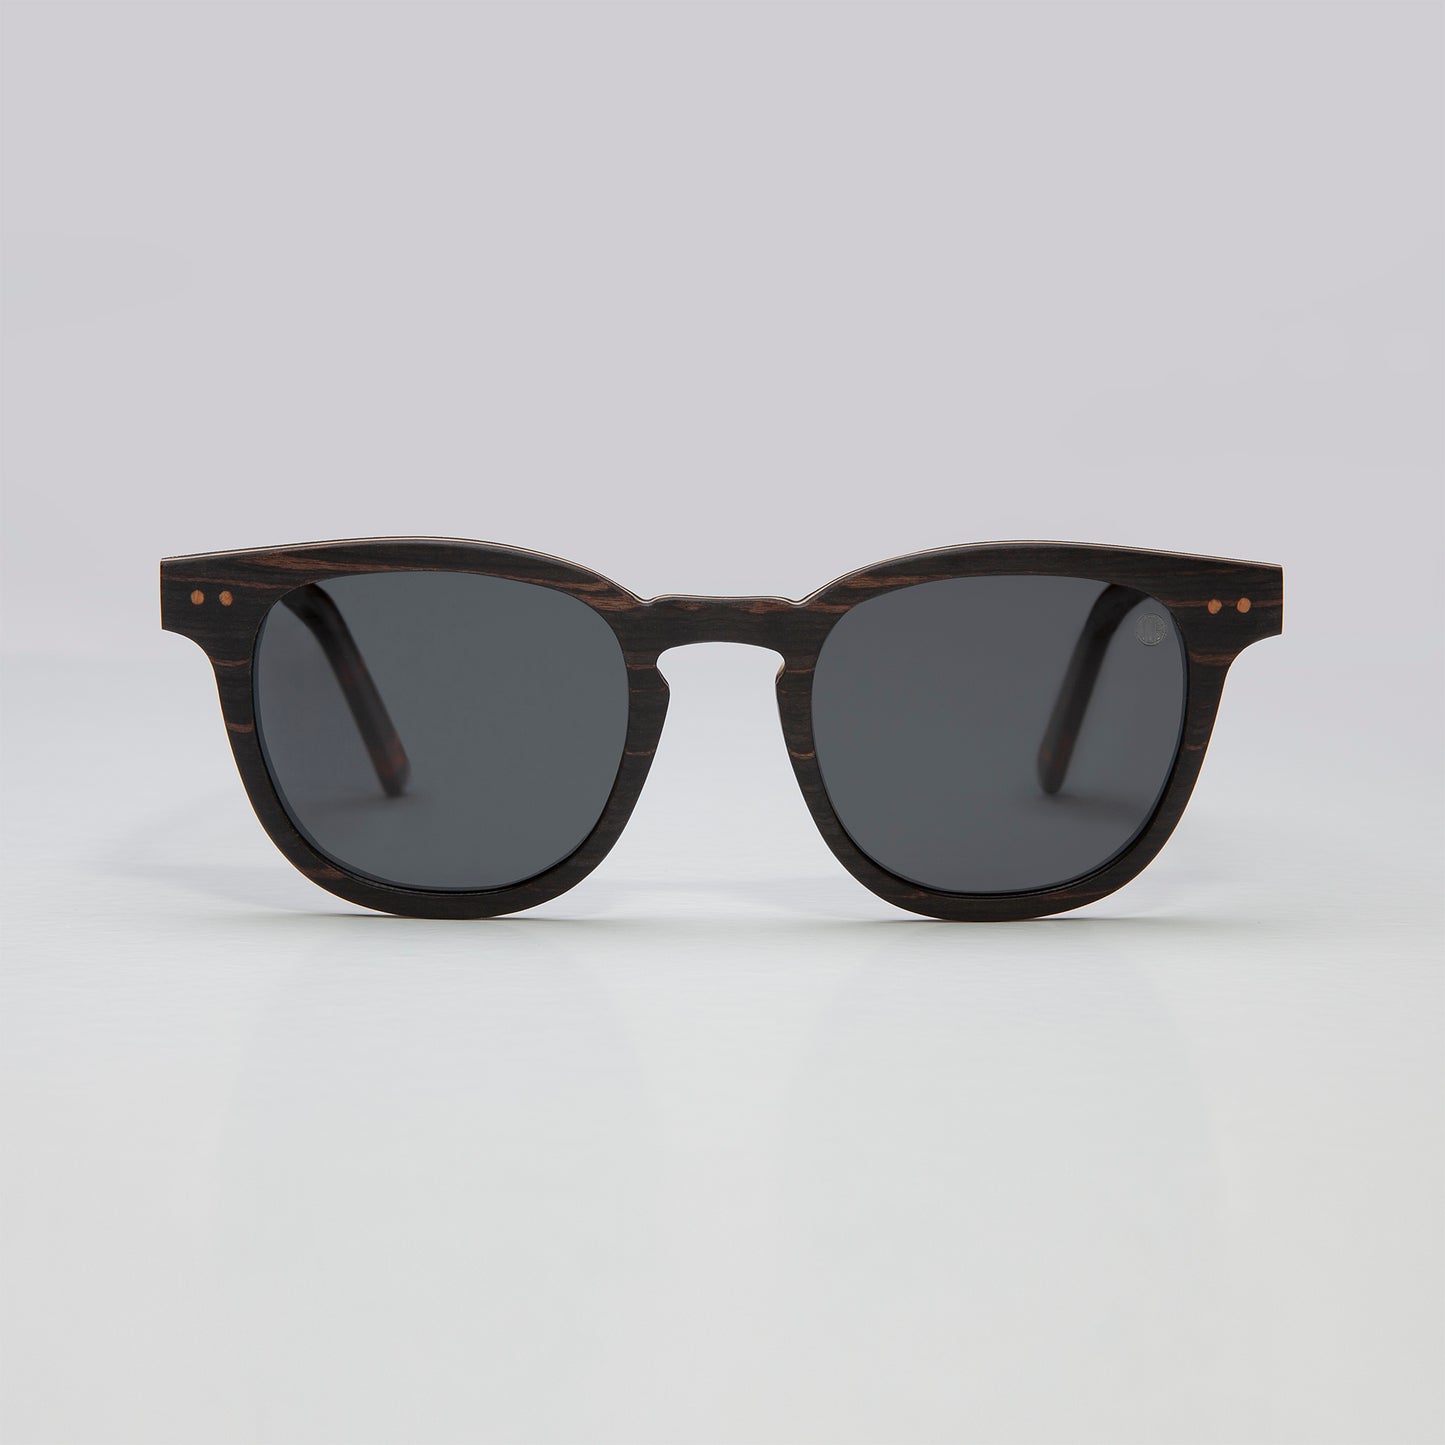 Eco Friendly SunglassesShaka BlackThe SHAKA sunglasses are the ultimate post surf pair of shades. With stylish frames made with black sandle wood off cuts, it provides a lightweight and beautiful desShaka Black